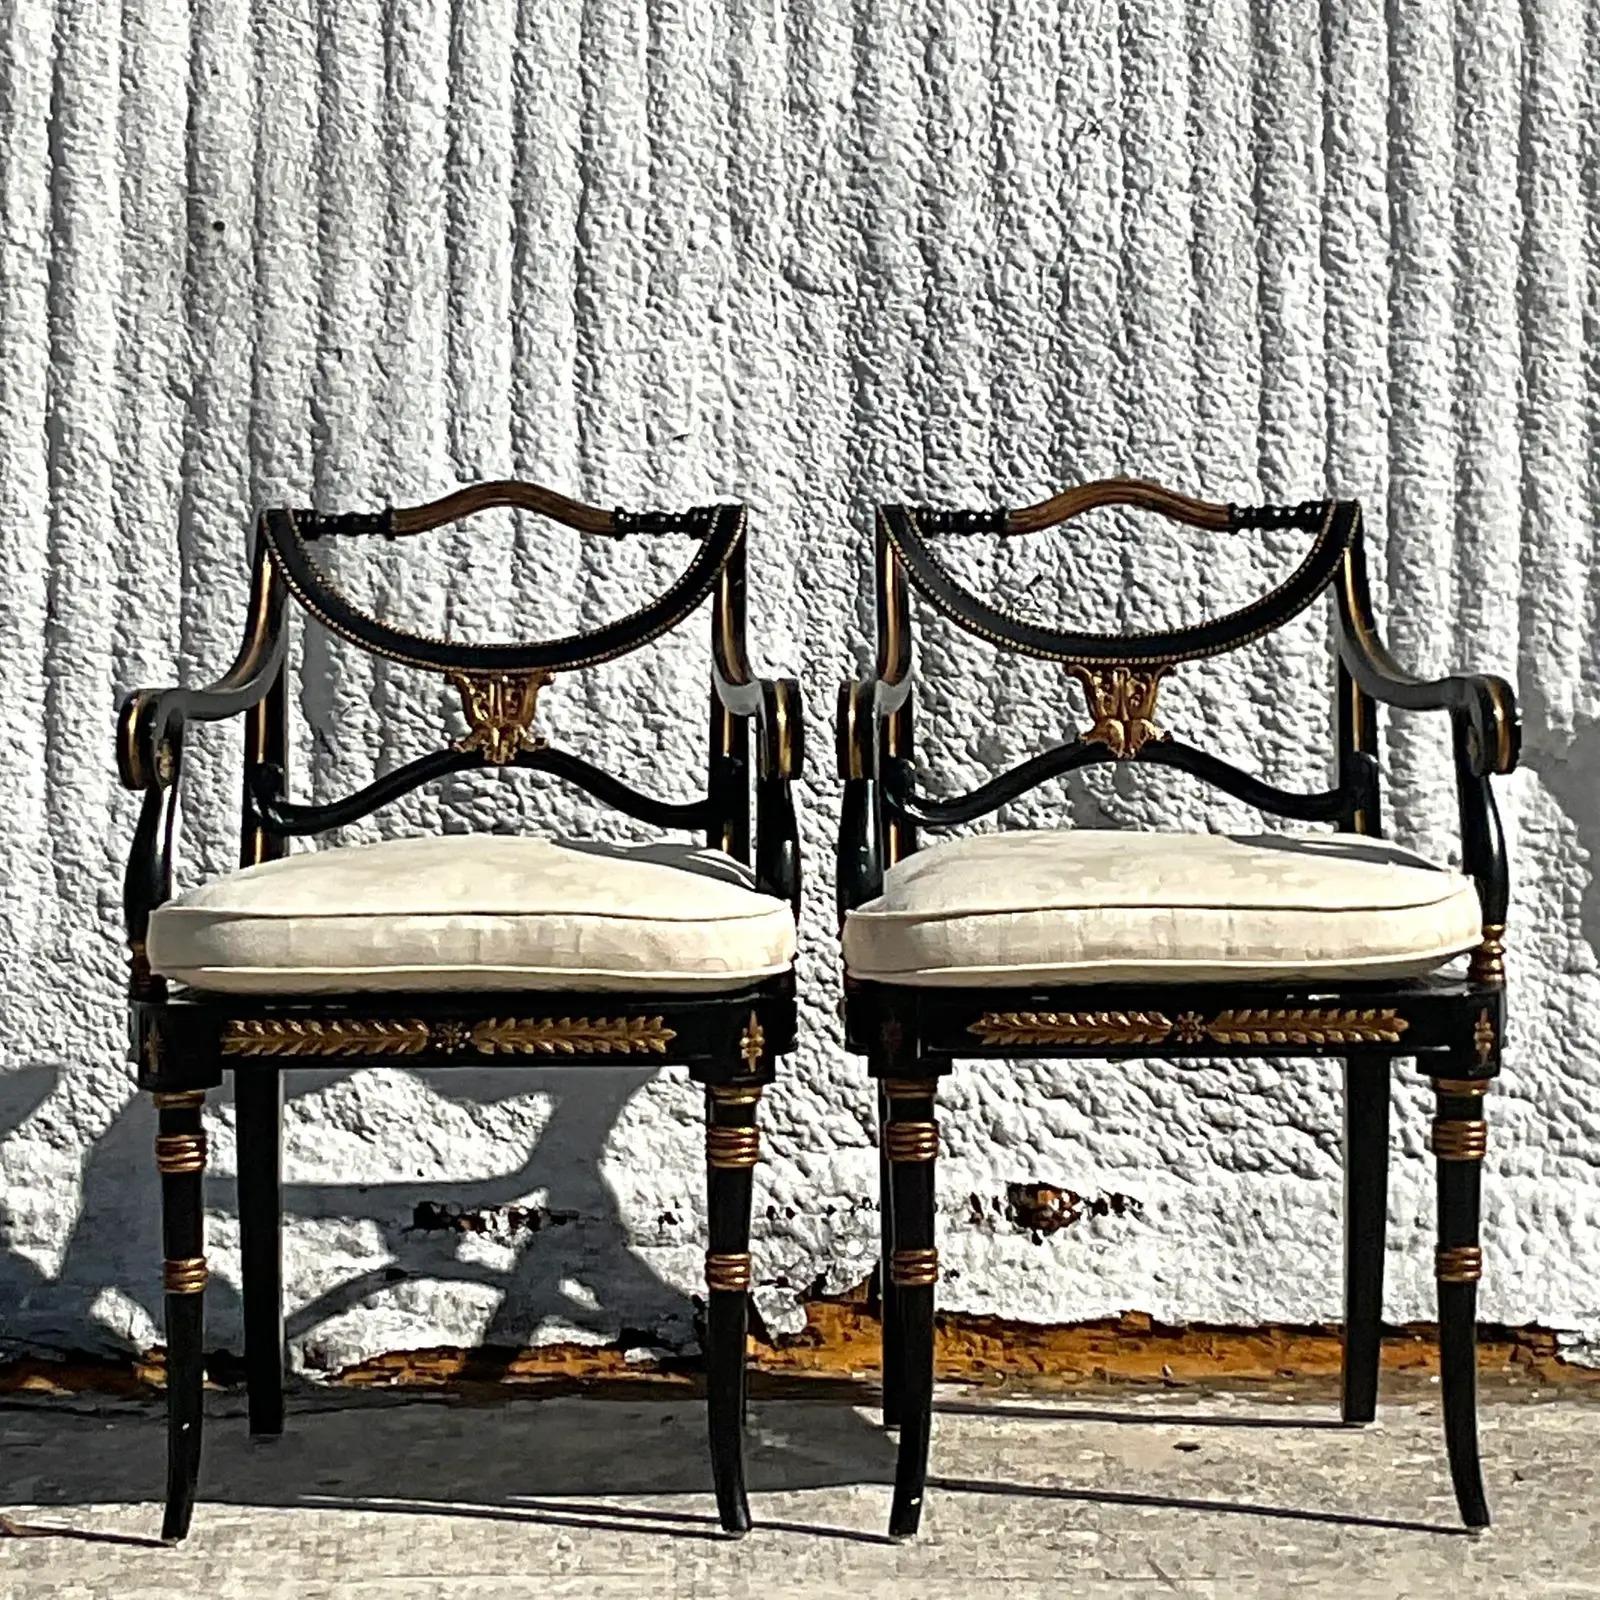 A fabulous pair of vintage Regency arm chairs. Made by the iconic Theodore Alexander group. Beautiful hand carved detail with inset cane panels. Gorgeous gilt touches on a gloss black frame. Acquired from a Palm Beach estate.